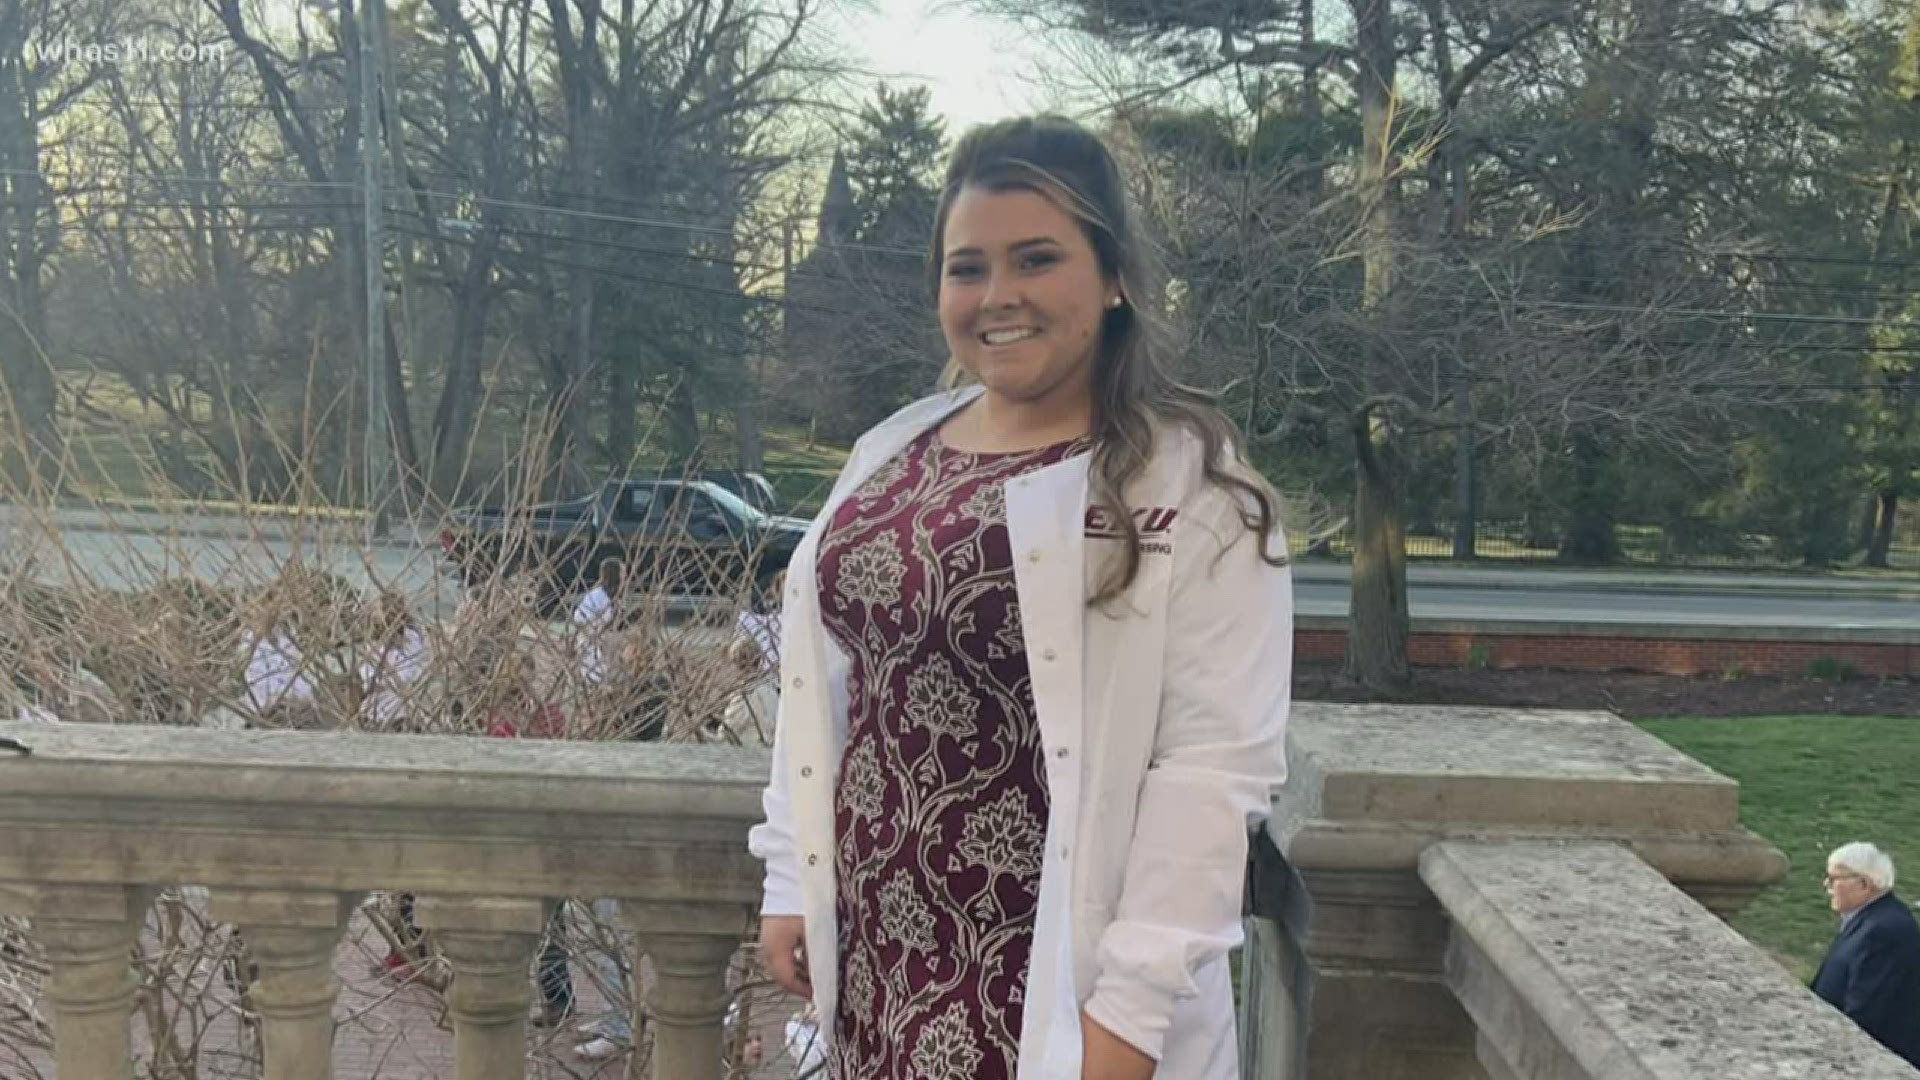 A Collins High School graduate and current EKU nursing student is heading to New Jersey to help nurses in need during the coronavirus outbreak.